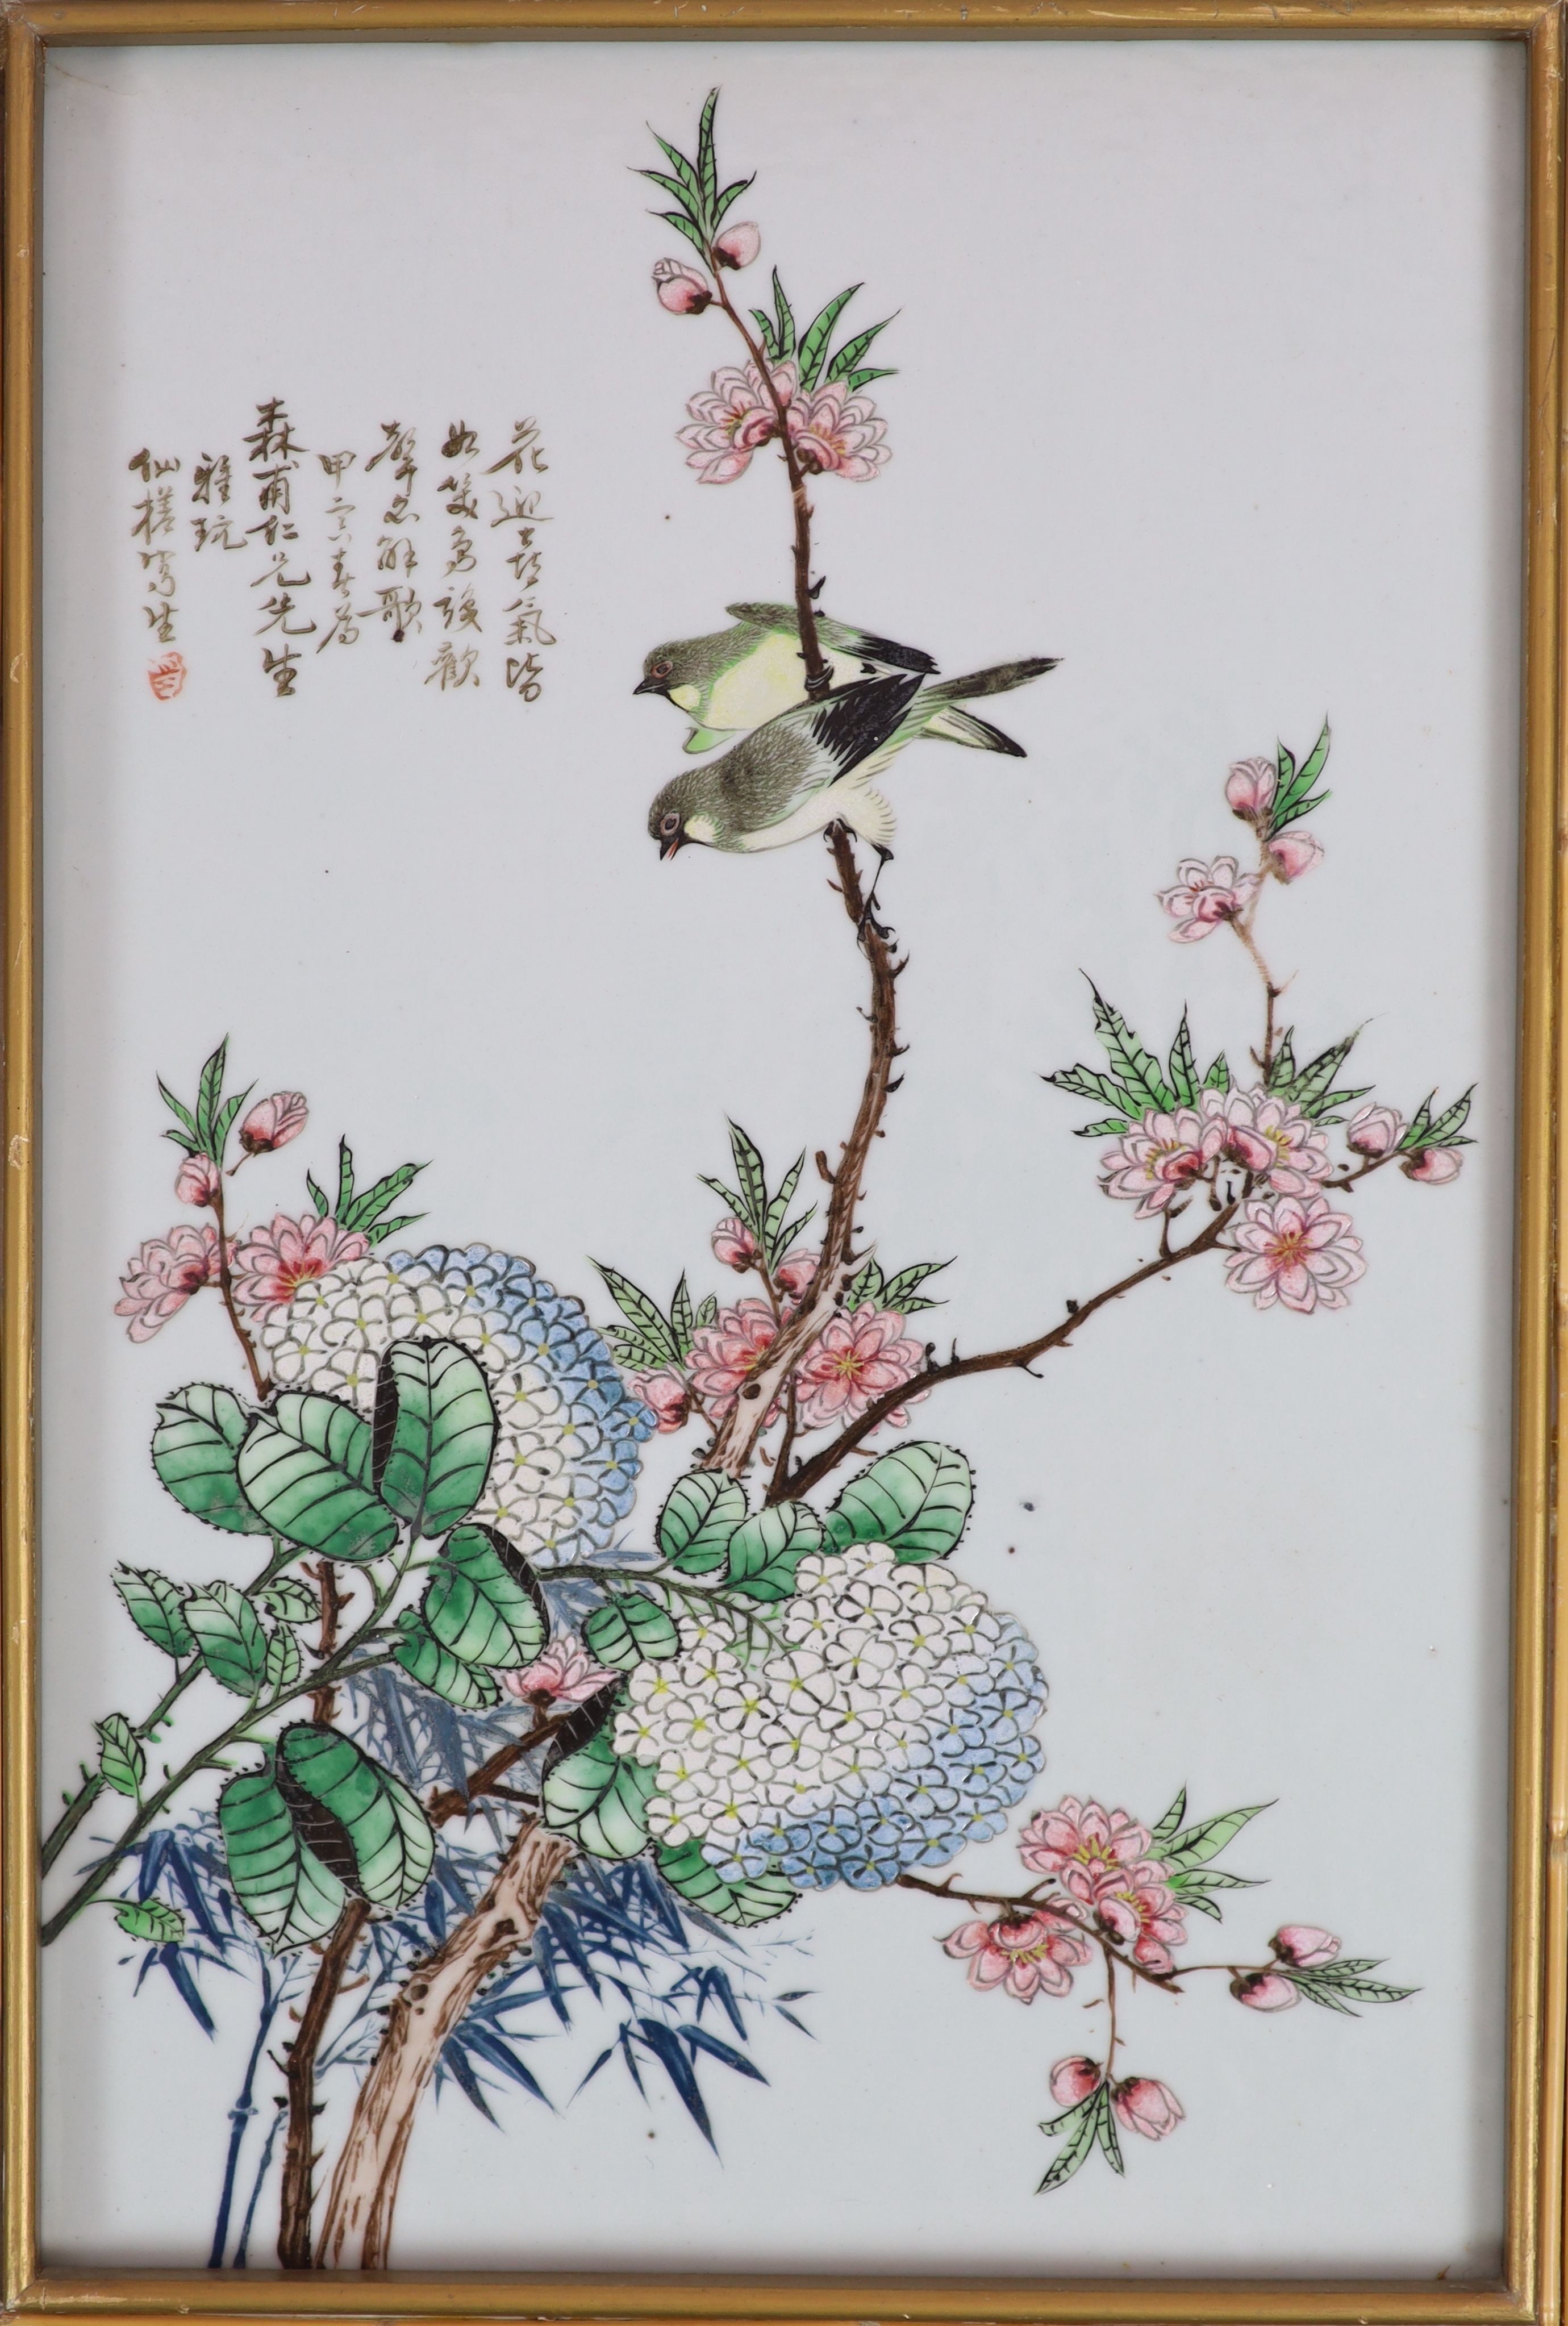 An assembled set of five Chinese enamelled porcelain ‘bird’ plaques, early - mid 20th century, each 38cm x 25cm, in similar mounts and frames